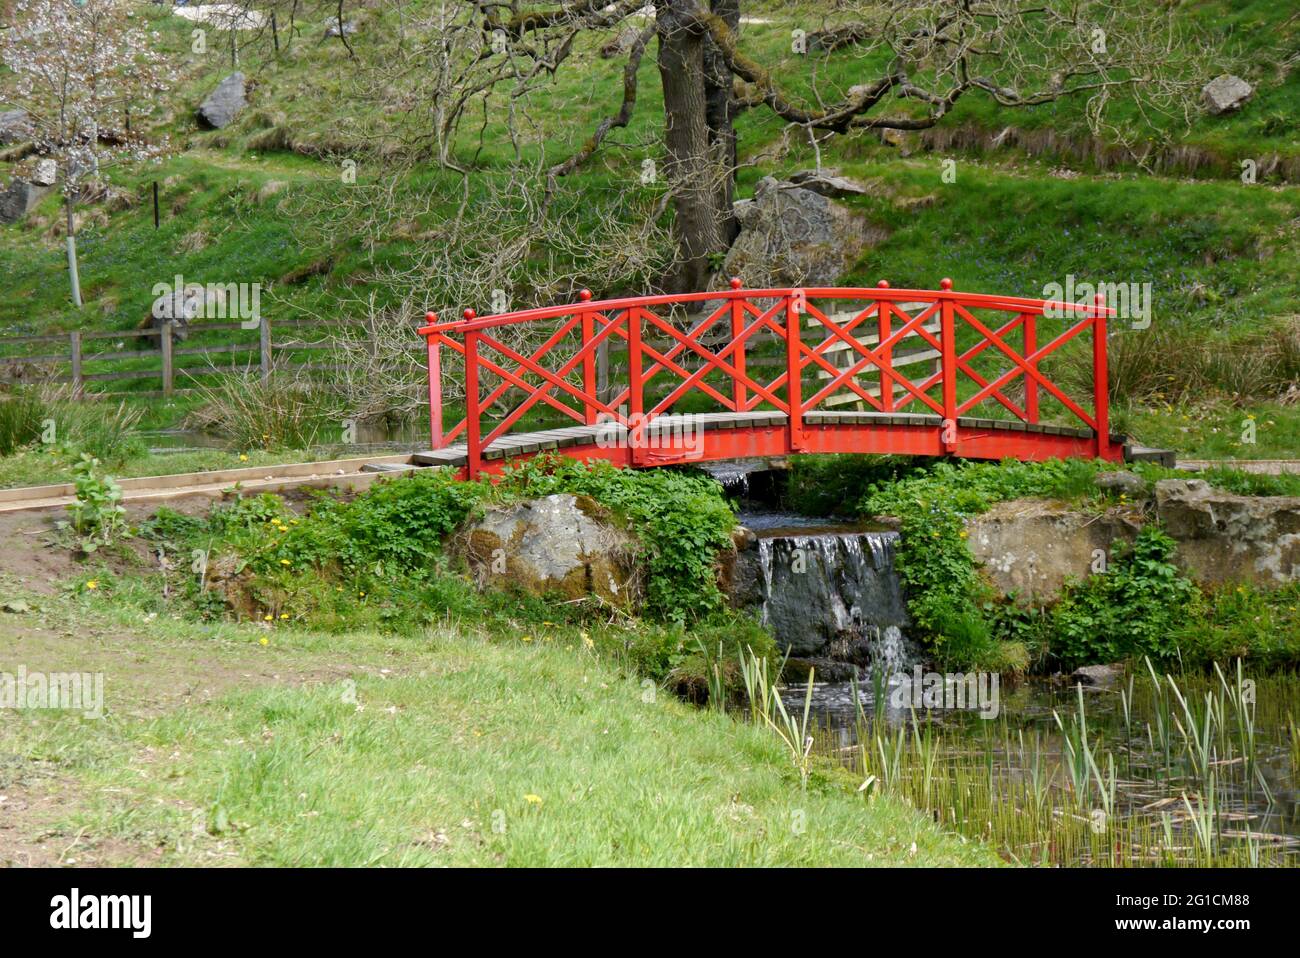 Wooden Red Bridge over Beck Flowing into the Sunshine Lake at the Himalayan Garden & Sculpture Park, Grewelthorpe, Ripon, North Yorkshire, England, UK Stock Photo